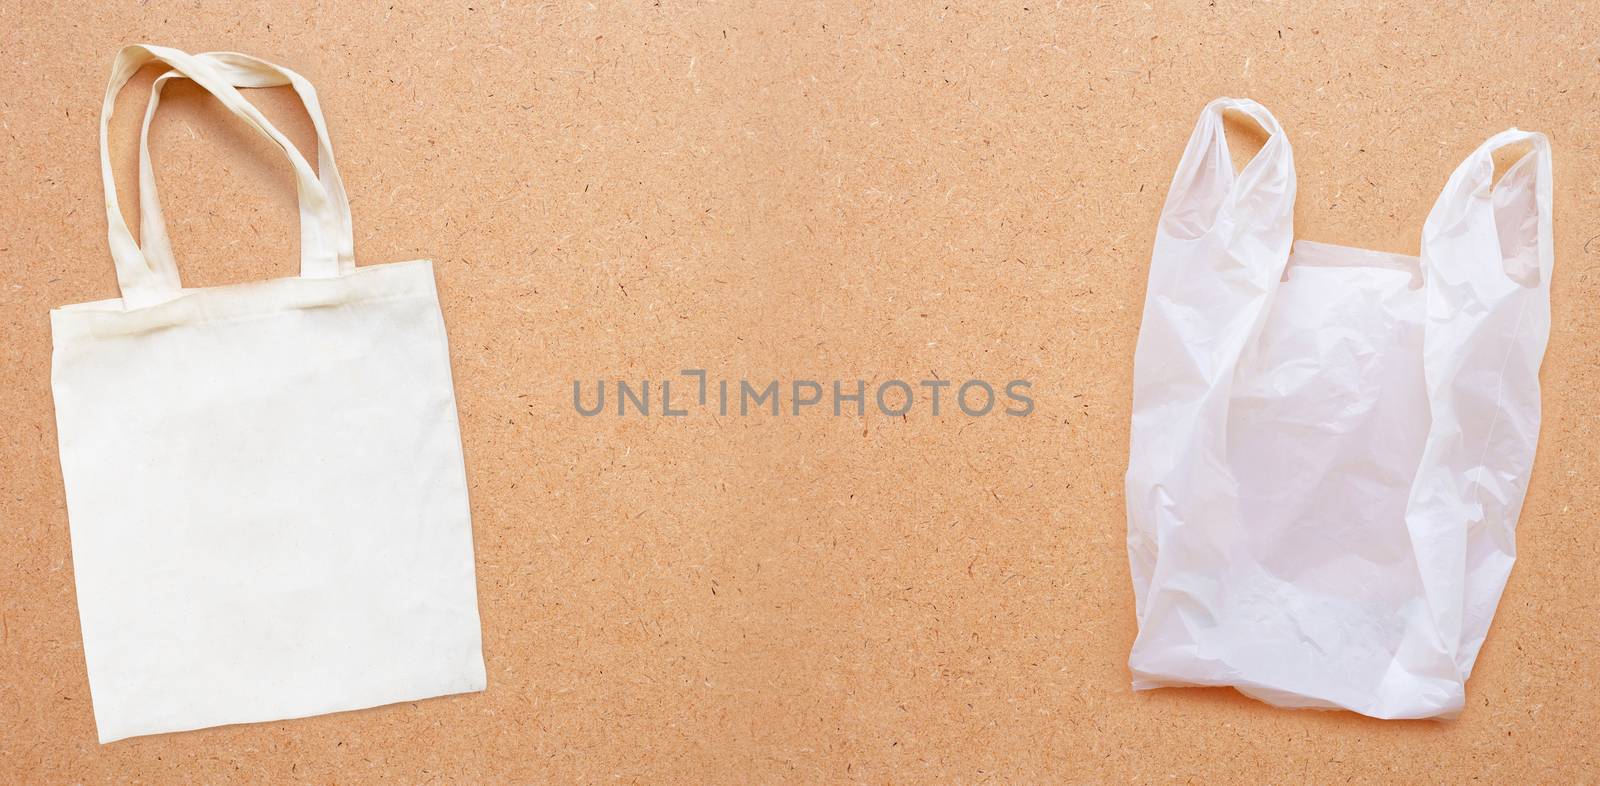 White fabric bag with white plastic bag on plywood background.  Copy space